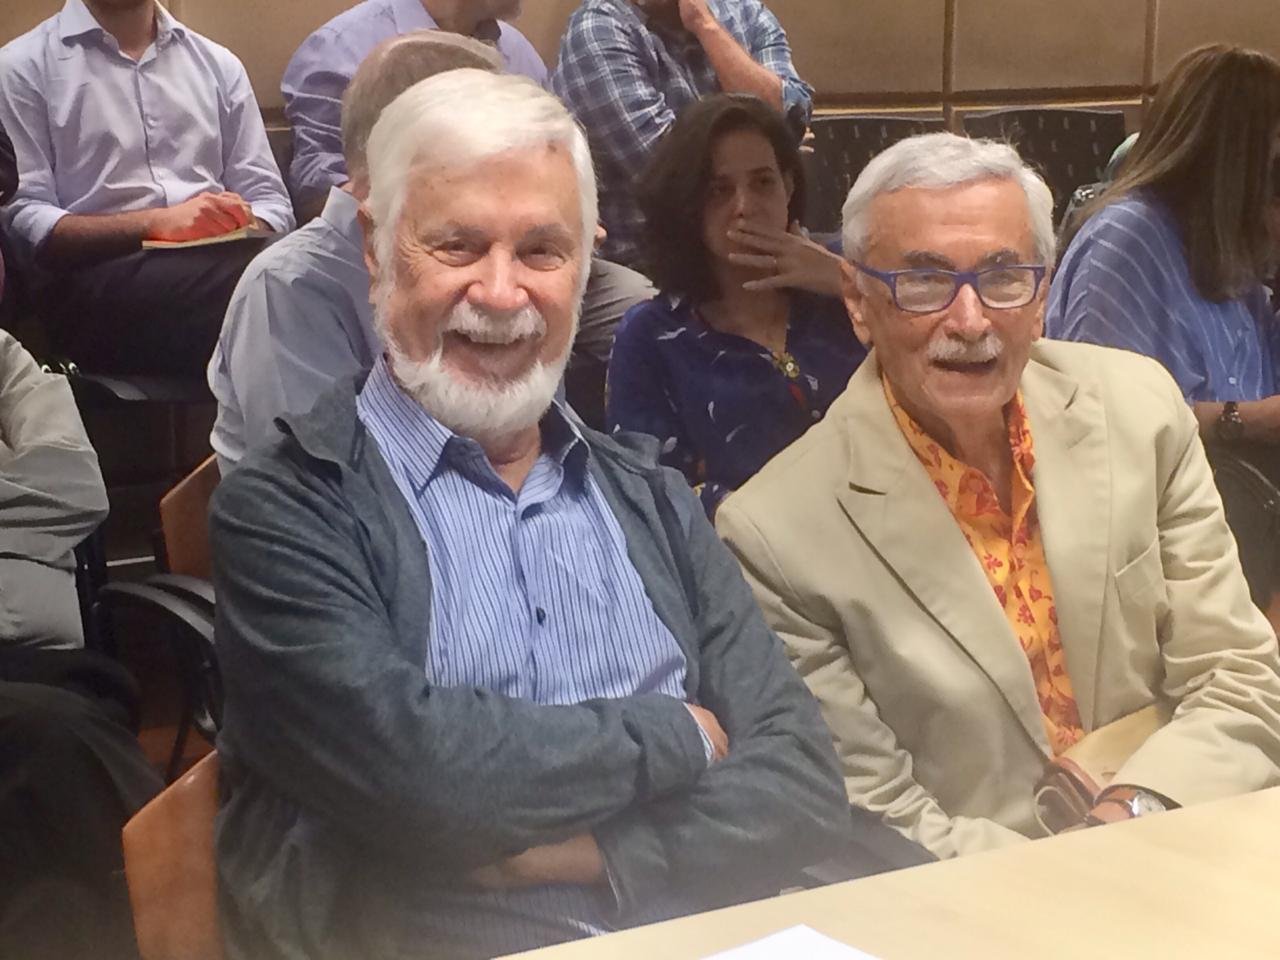 Two men smiling for the camera at a conference.